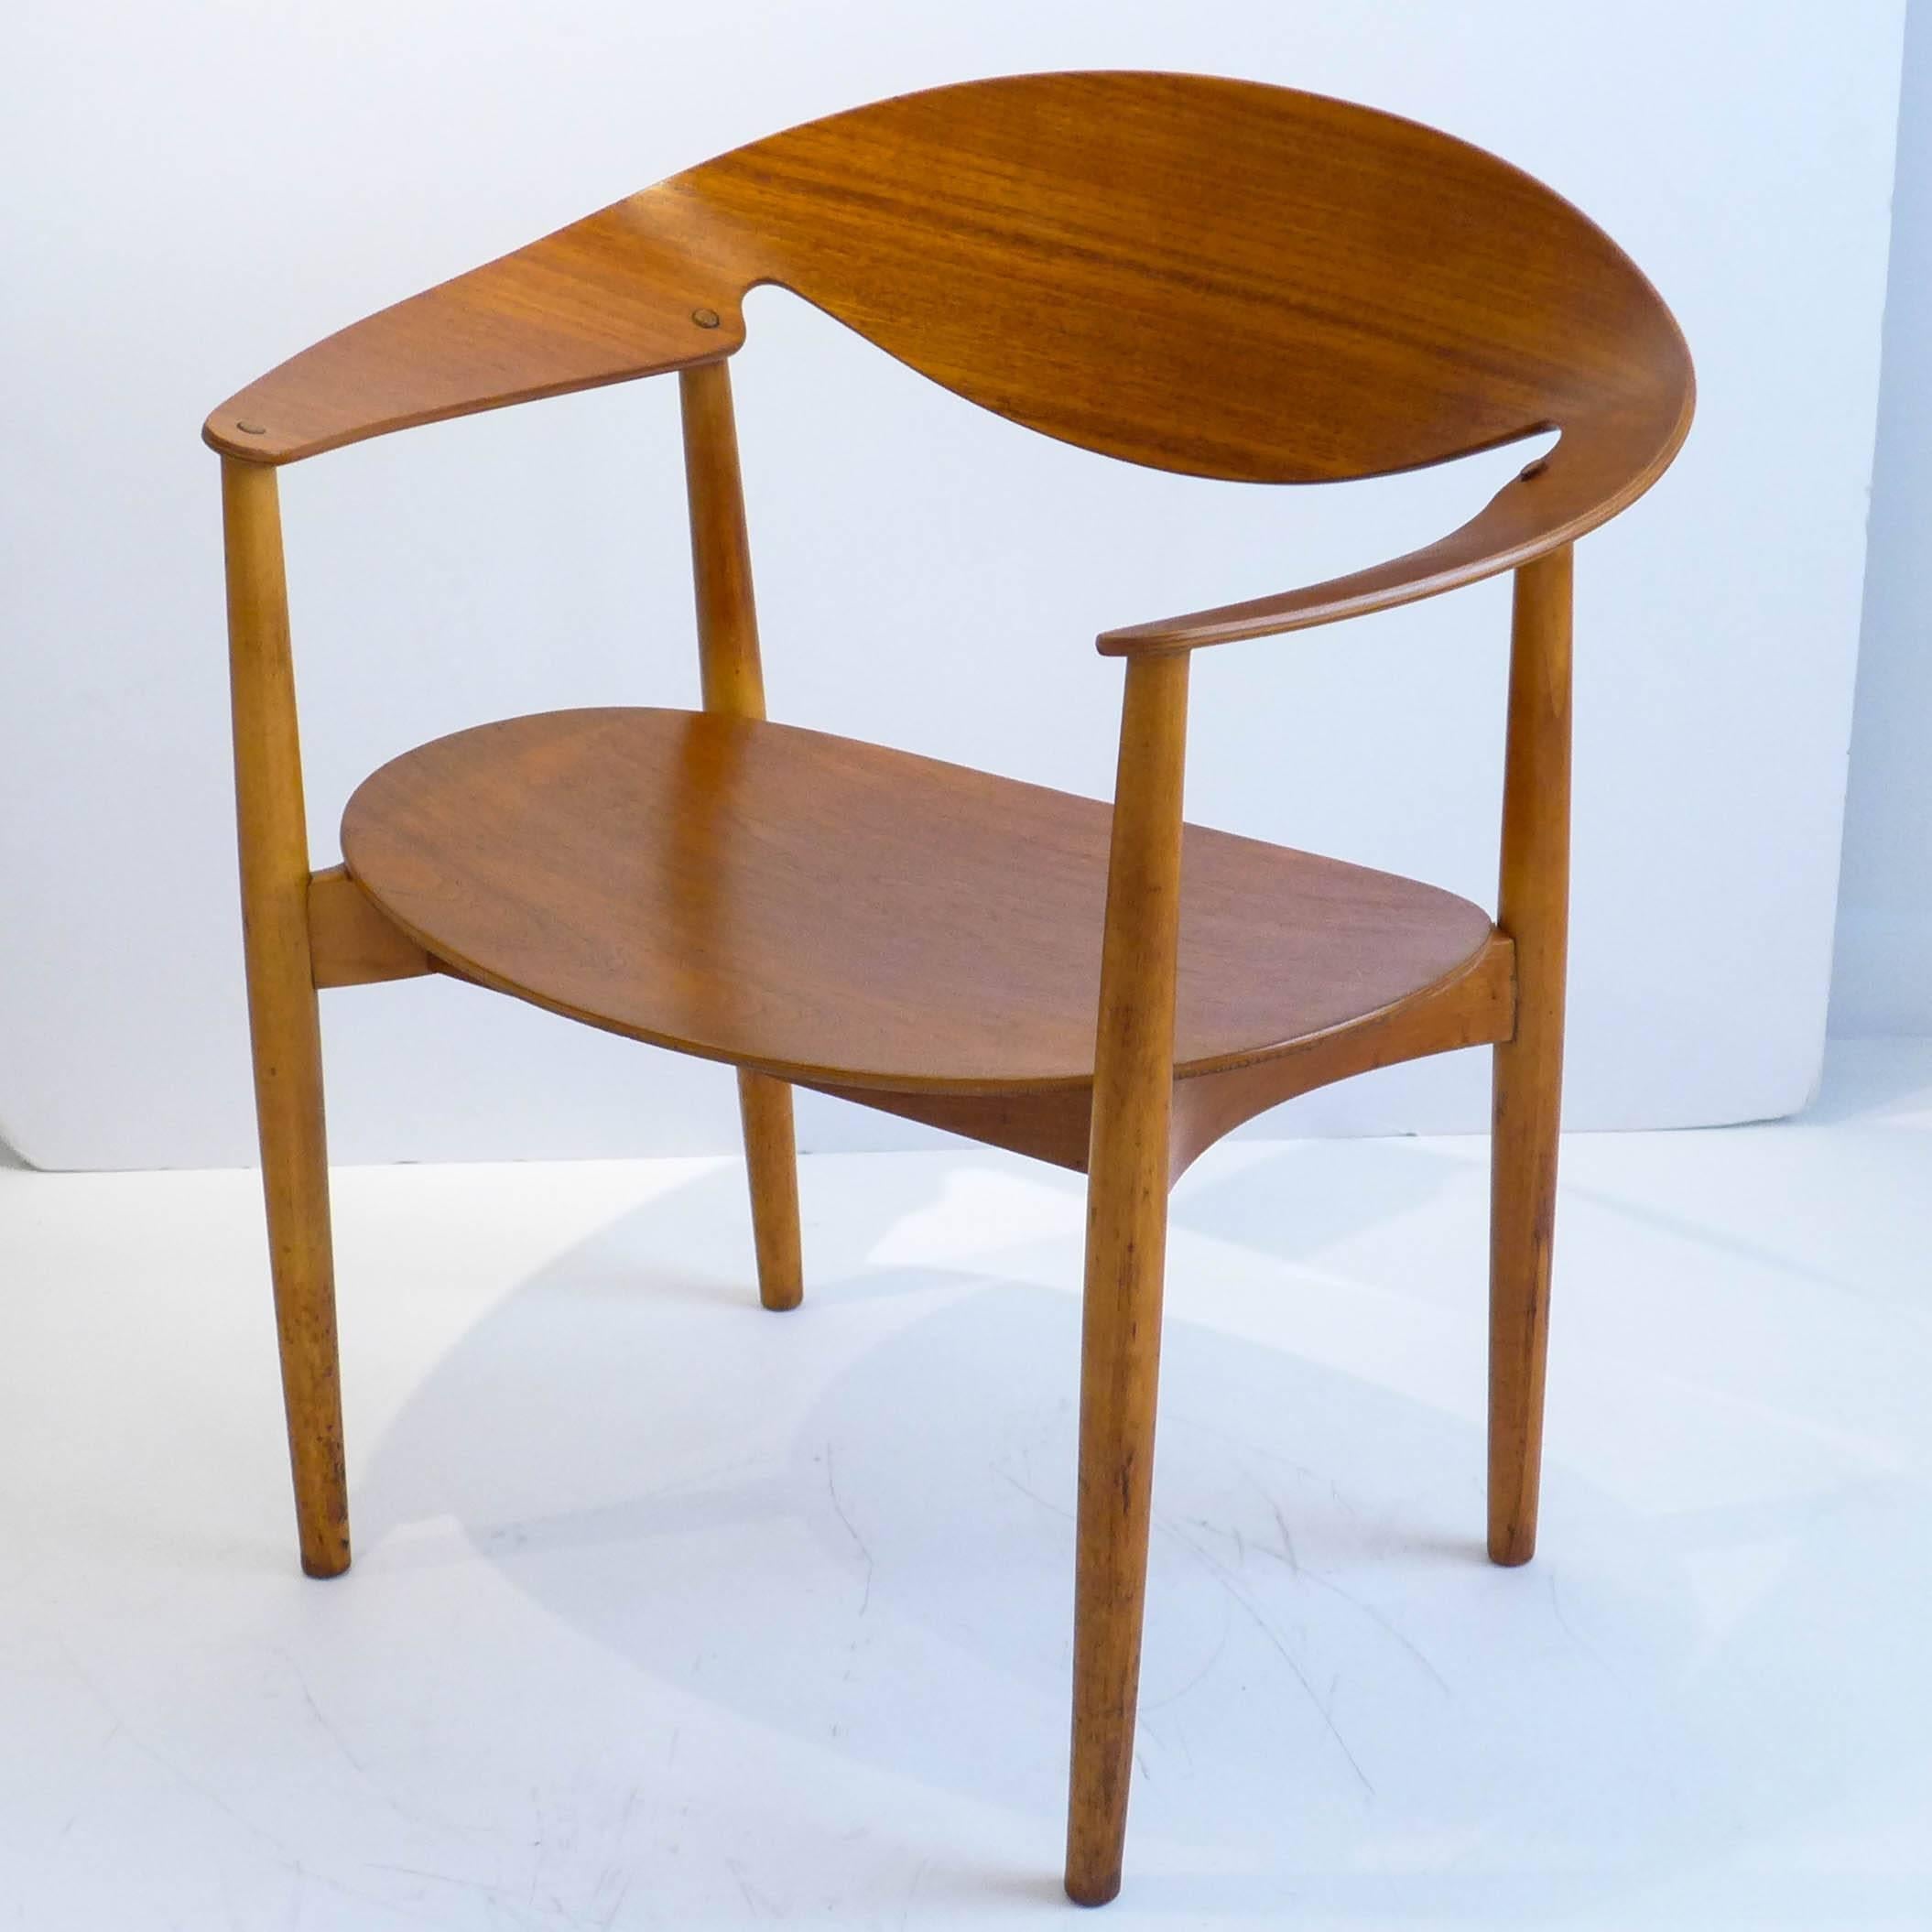 Early and rare metropolitan chair of teak plywood and lathe-turned beech. Designed by Aksel Bender Madsen and Ejner Larsen and produced by Fritz Hansen, circa 1950s. In quite good vintage condition with original wooden plugs covering the screw holes